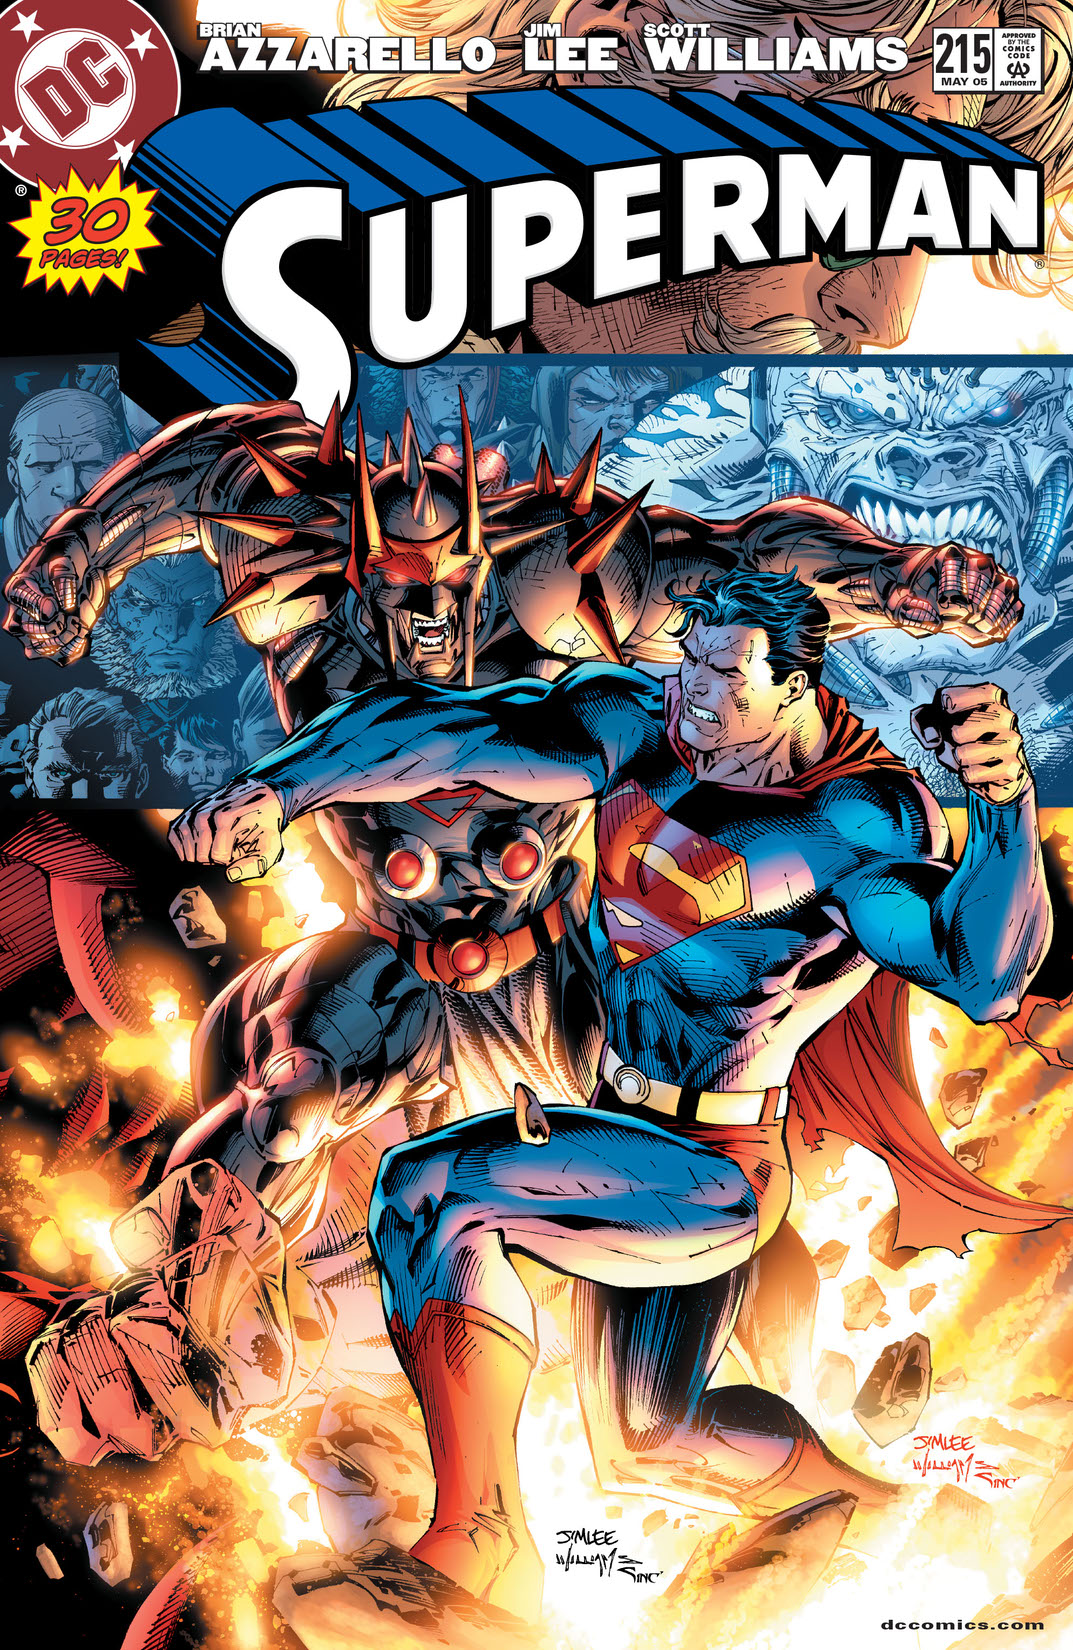 Superman (1986-2006) #215 preview images